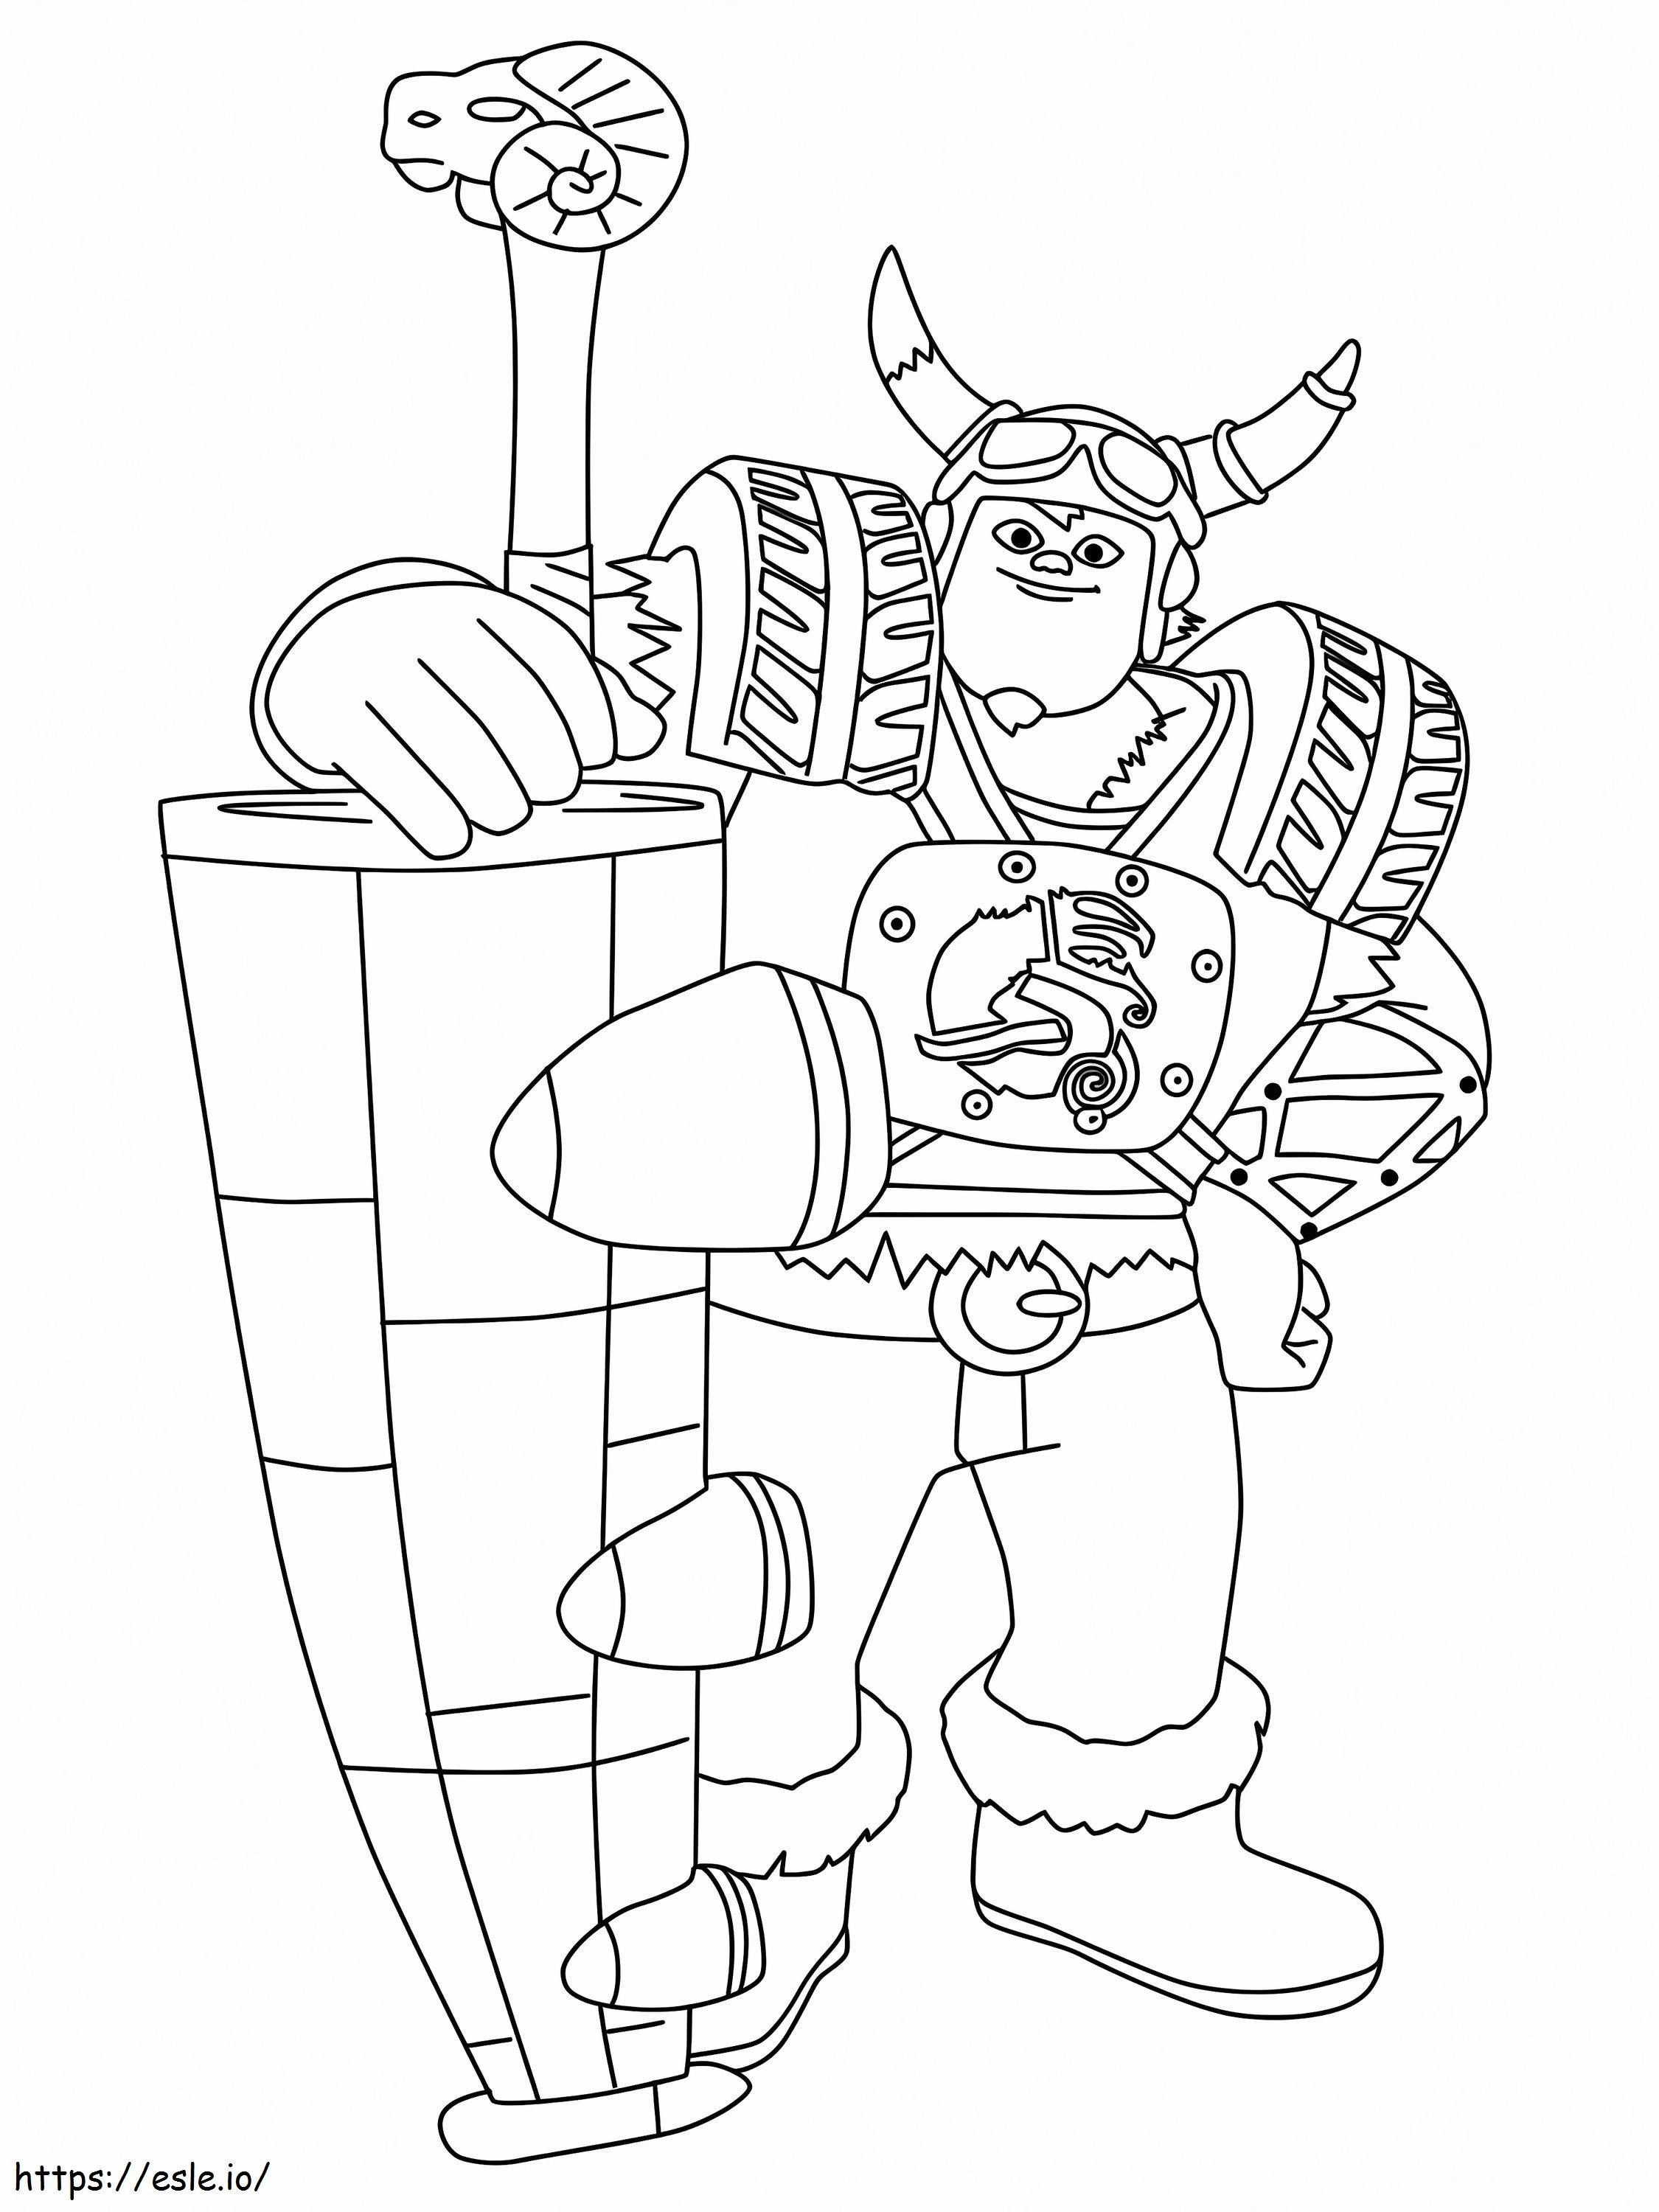 Crogar From Zak Storm coloring page